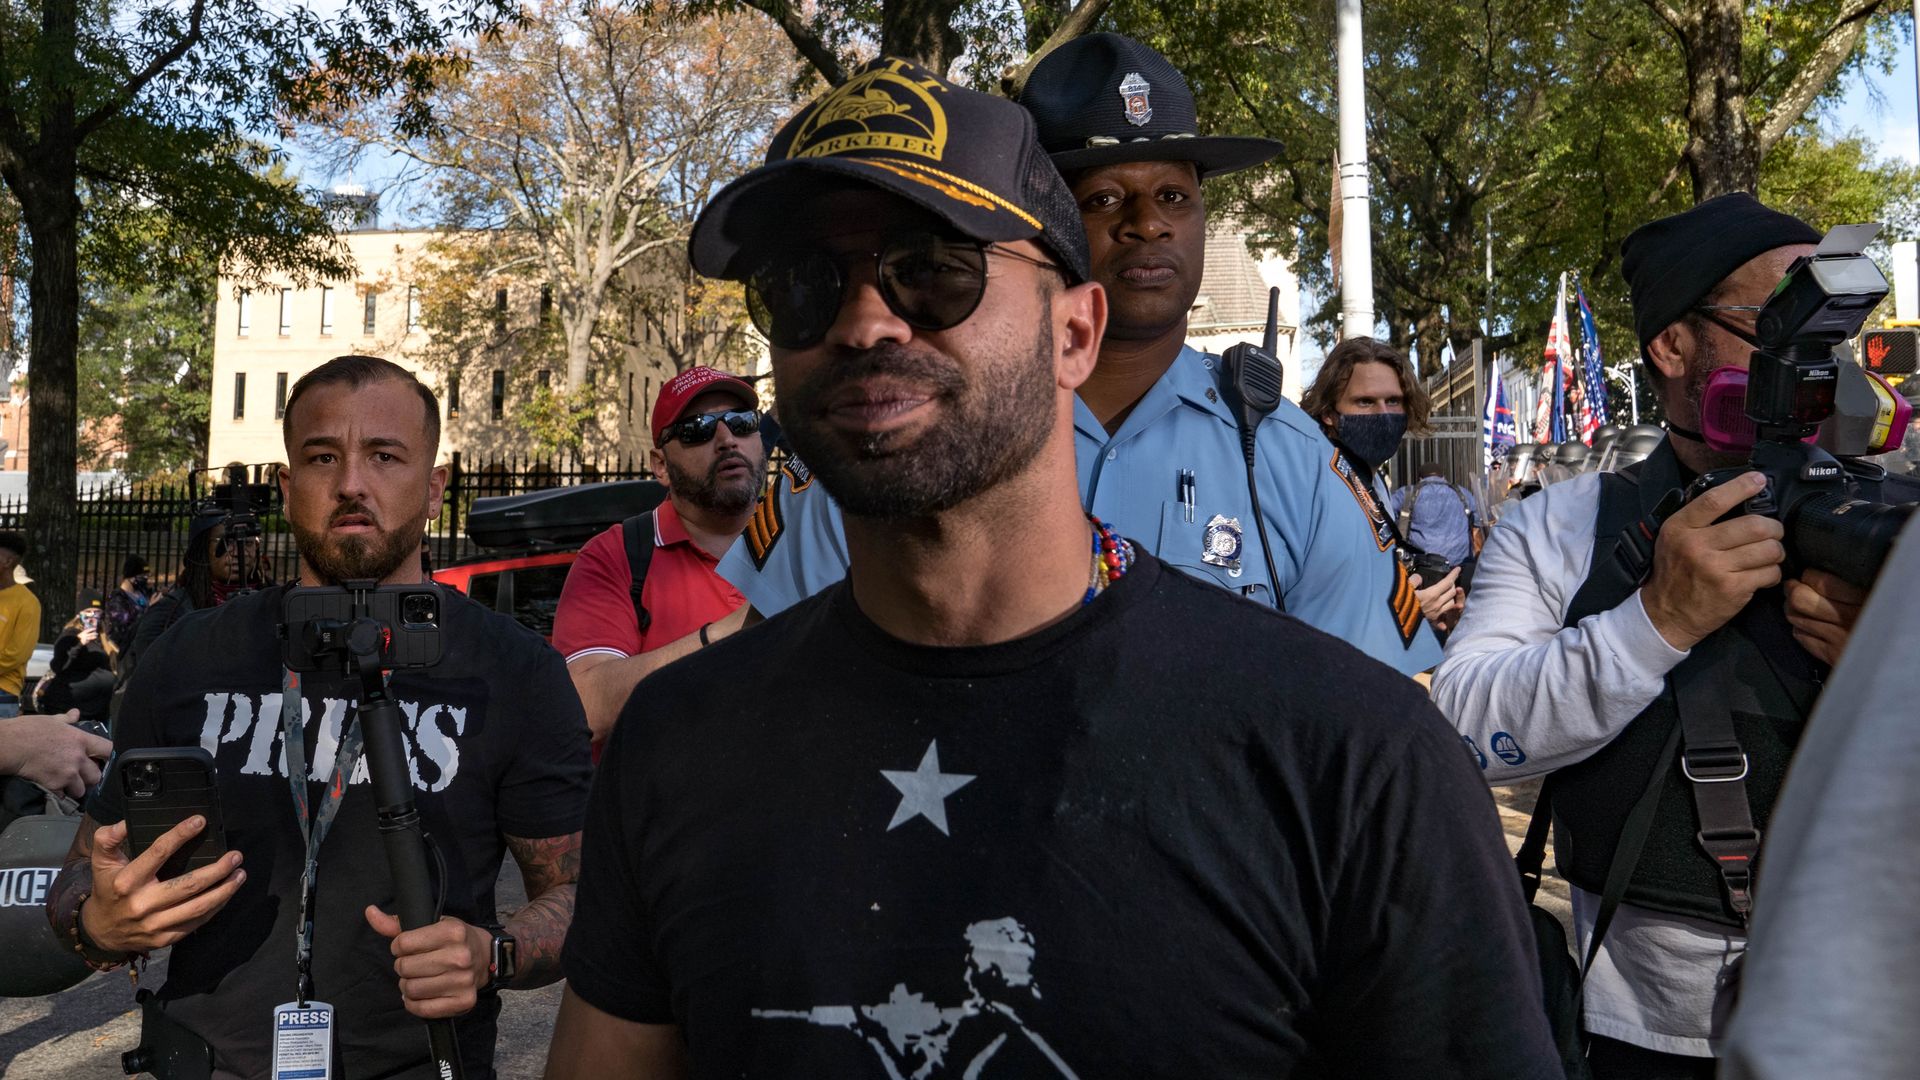 Enrique Tarrio, head of the Proud Boys, is escorted out of the areaoutside of the Georgia State Capital building on November 21, 2020 in Atlanta, Georgia. 